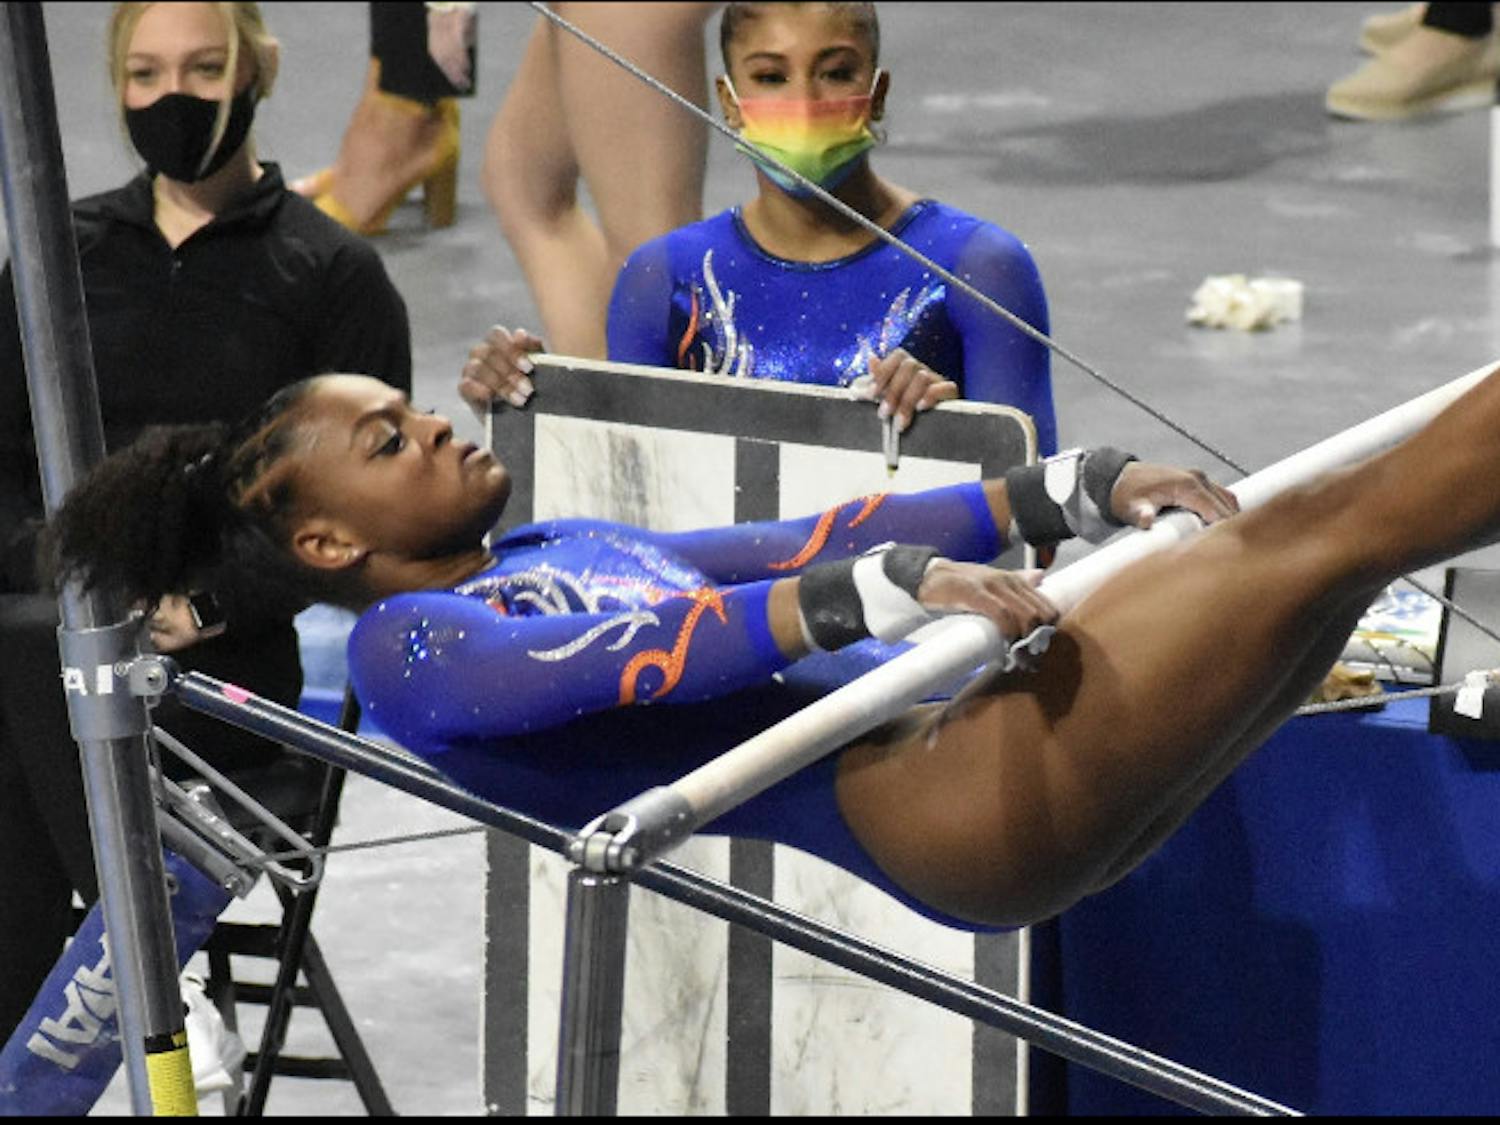 Trinity Thomas performs on the bars Jan. 29 vs Missouri. The junior standout returned from a six-week absence to lead Florida into the national championship